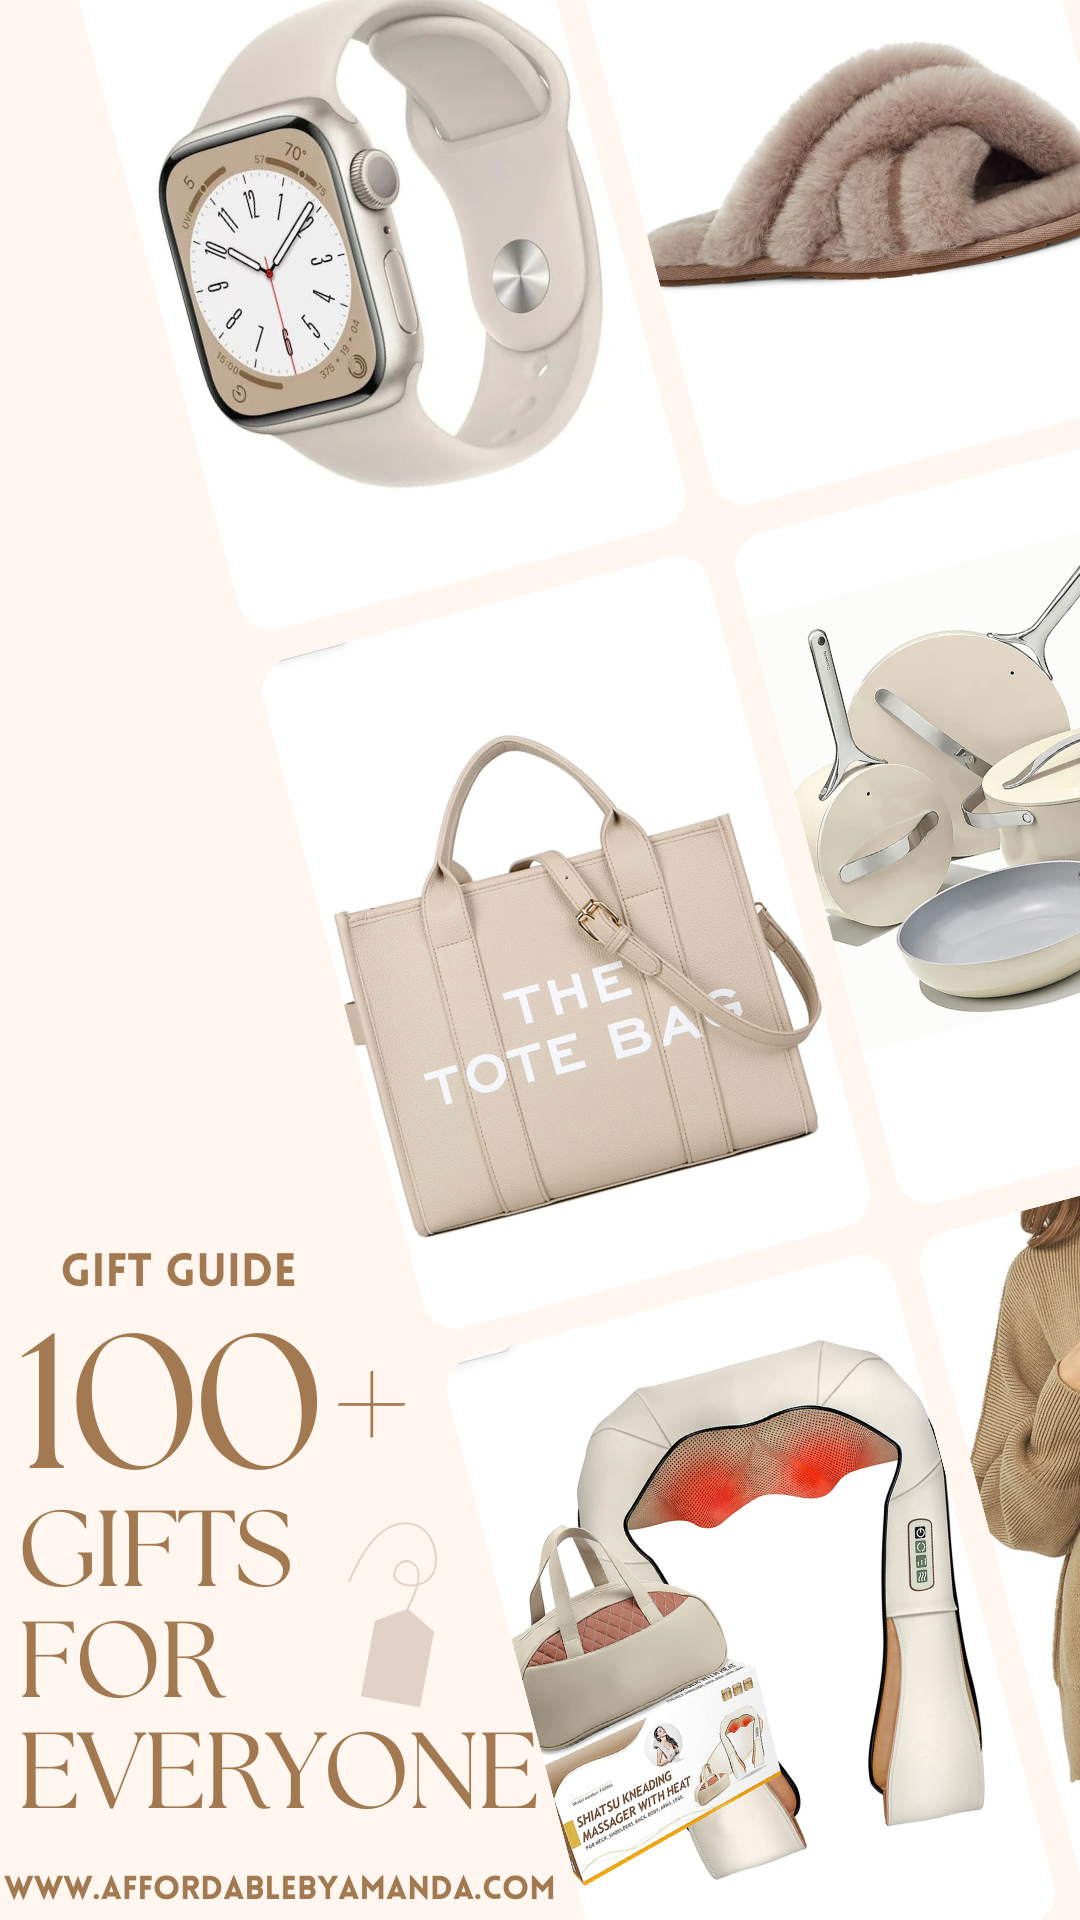 100+ Gift Ideas for Everyone